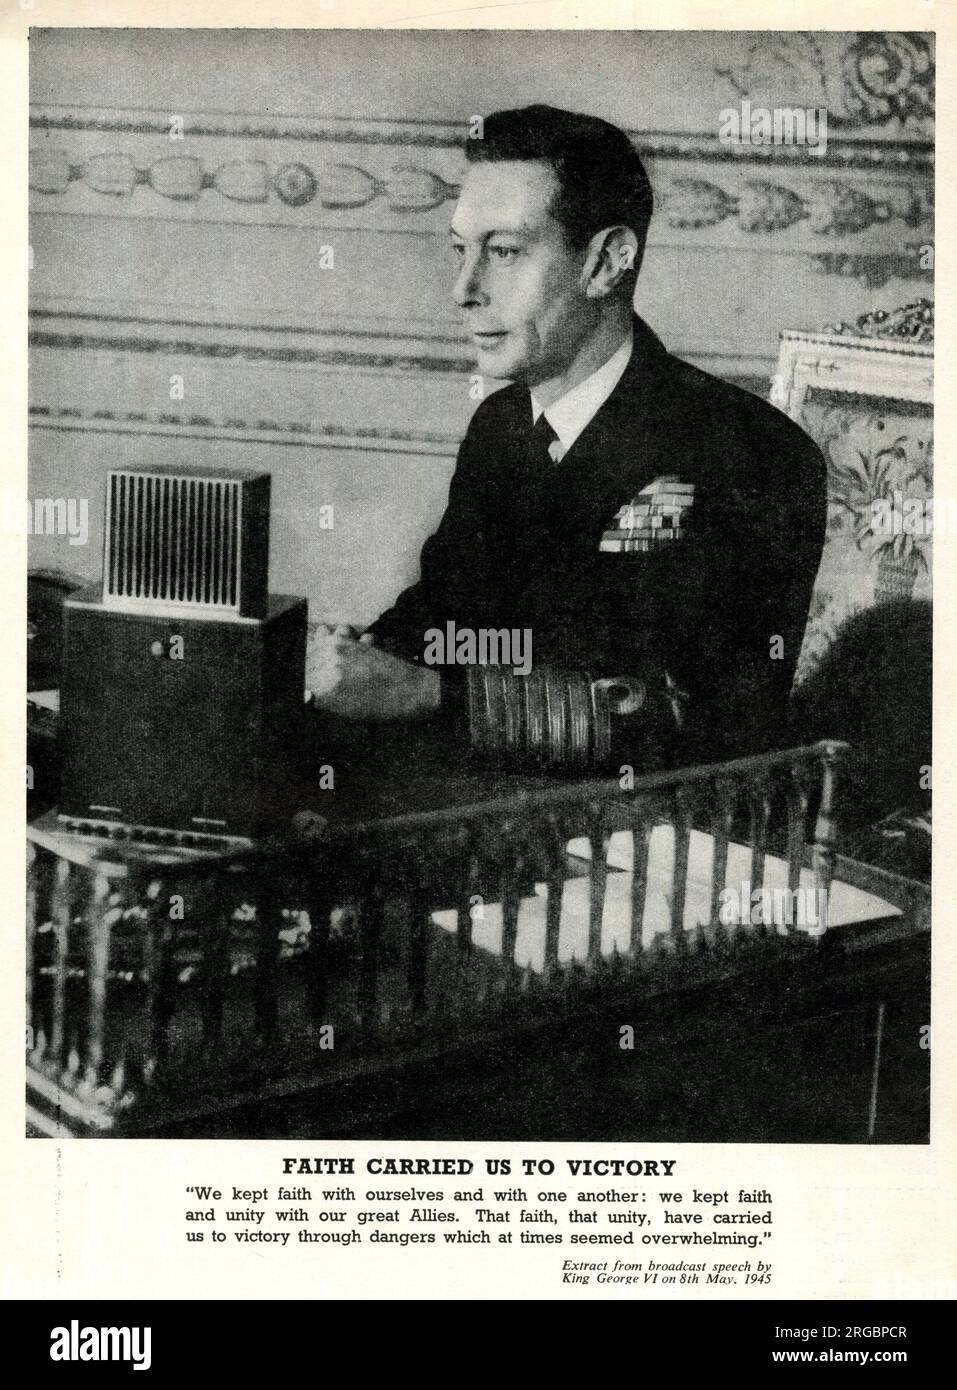 King George VI giving radio broadcast, 8 May 1945, end of WW2 - Faith carried us to Victory. Stock Photo